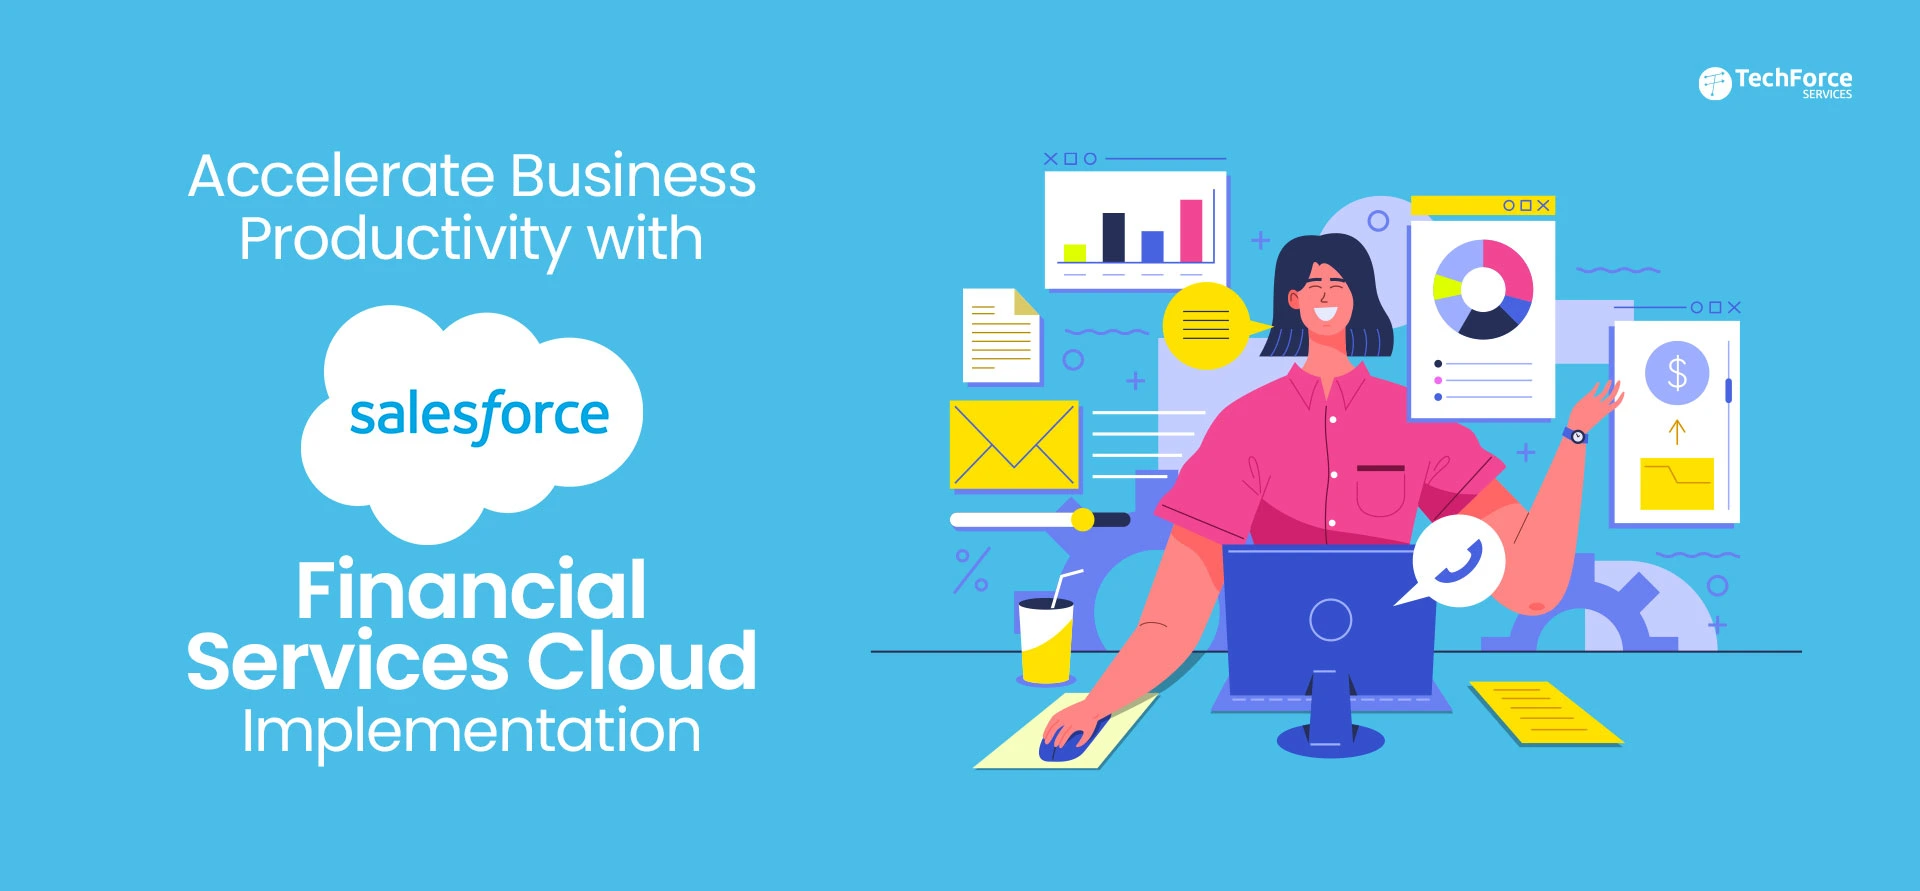 accelerate-your-business-productivity-with-salesforce-financial-services-cloud-implementation